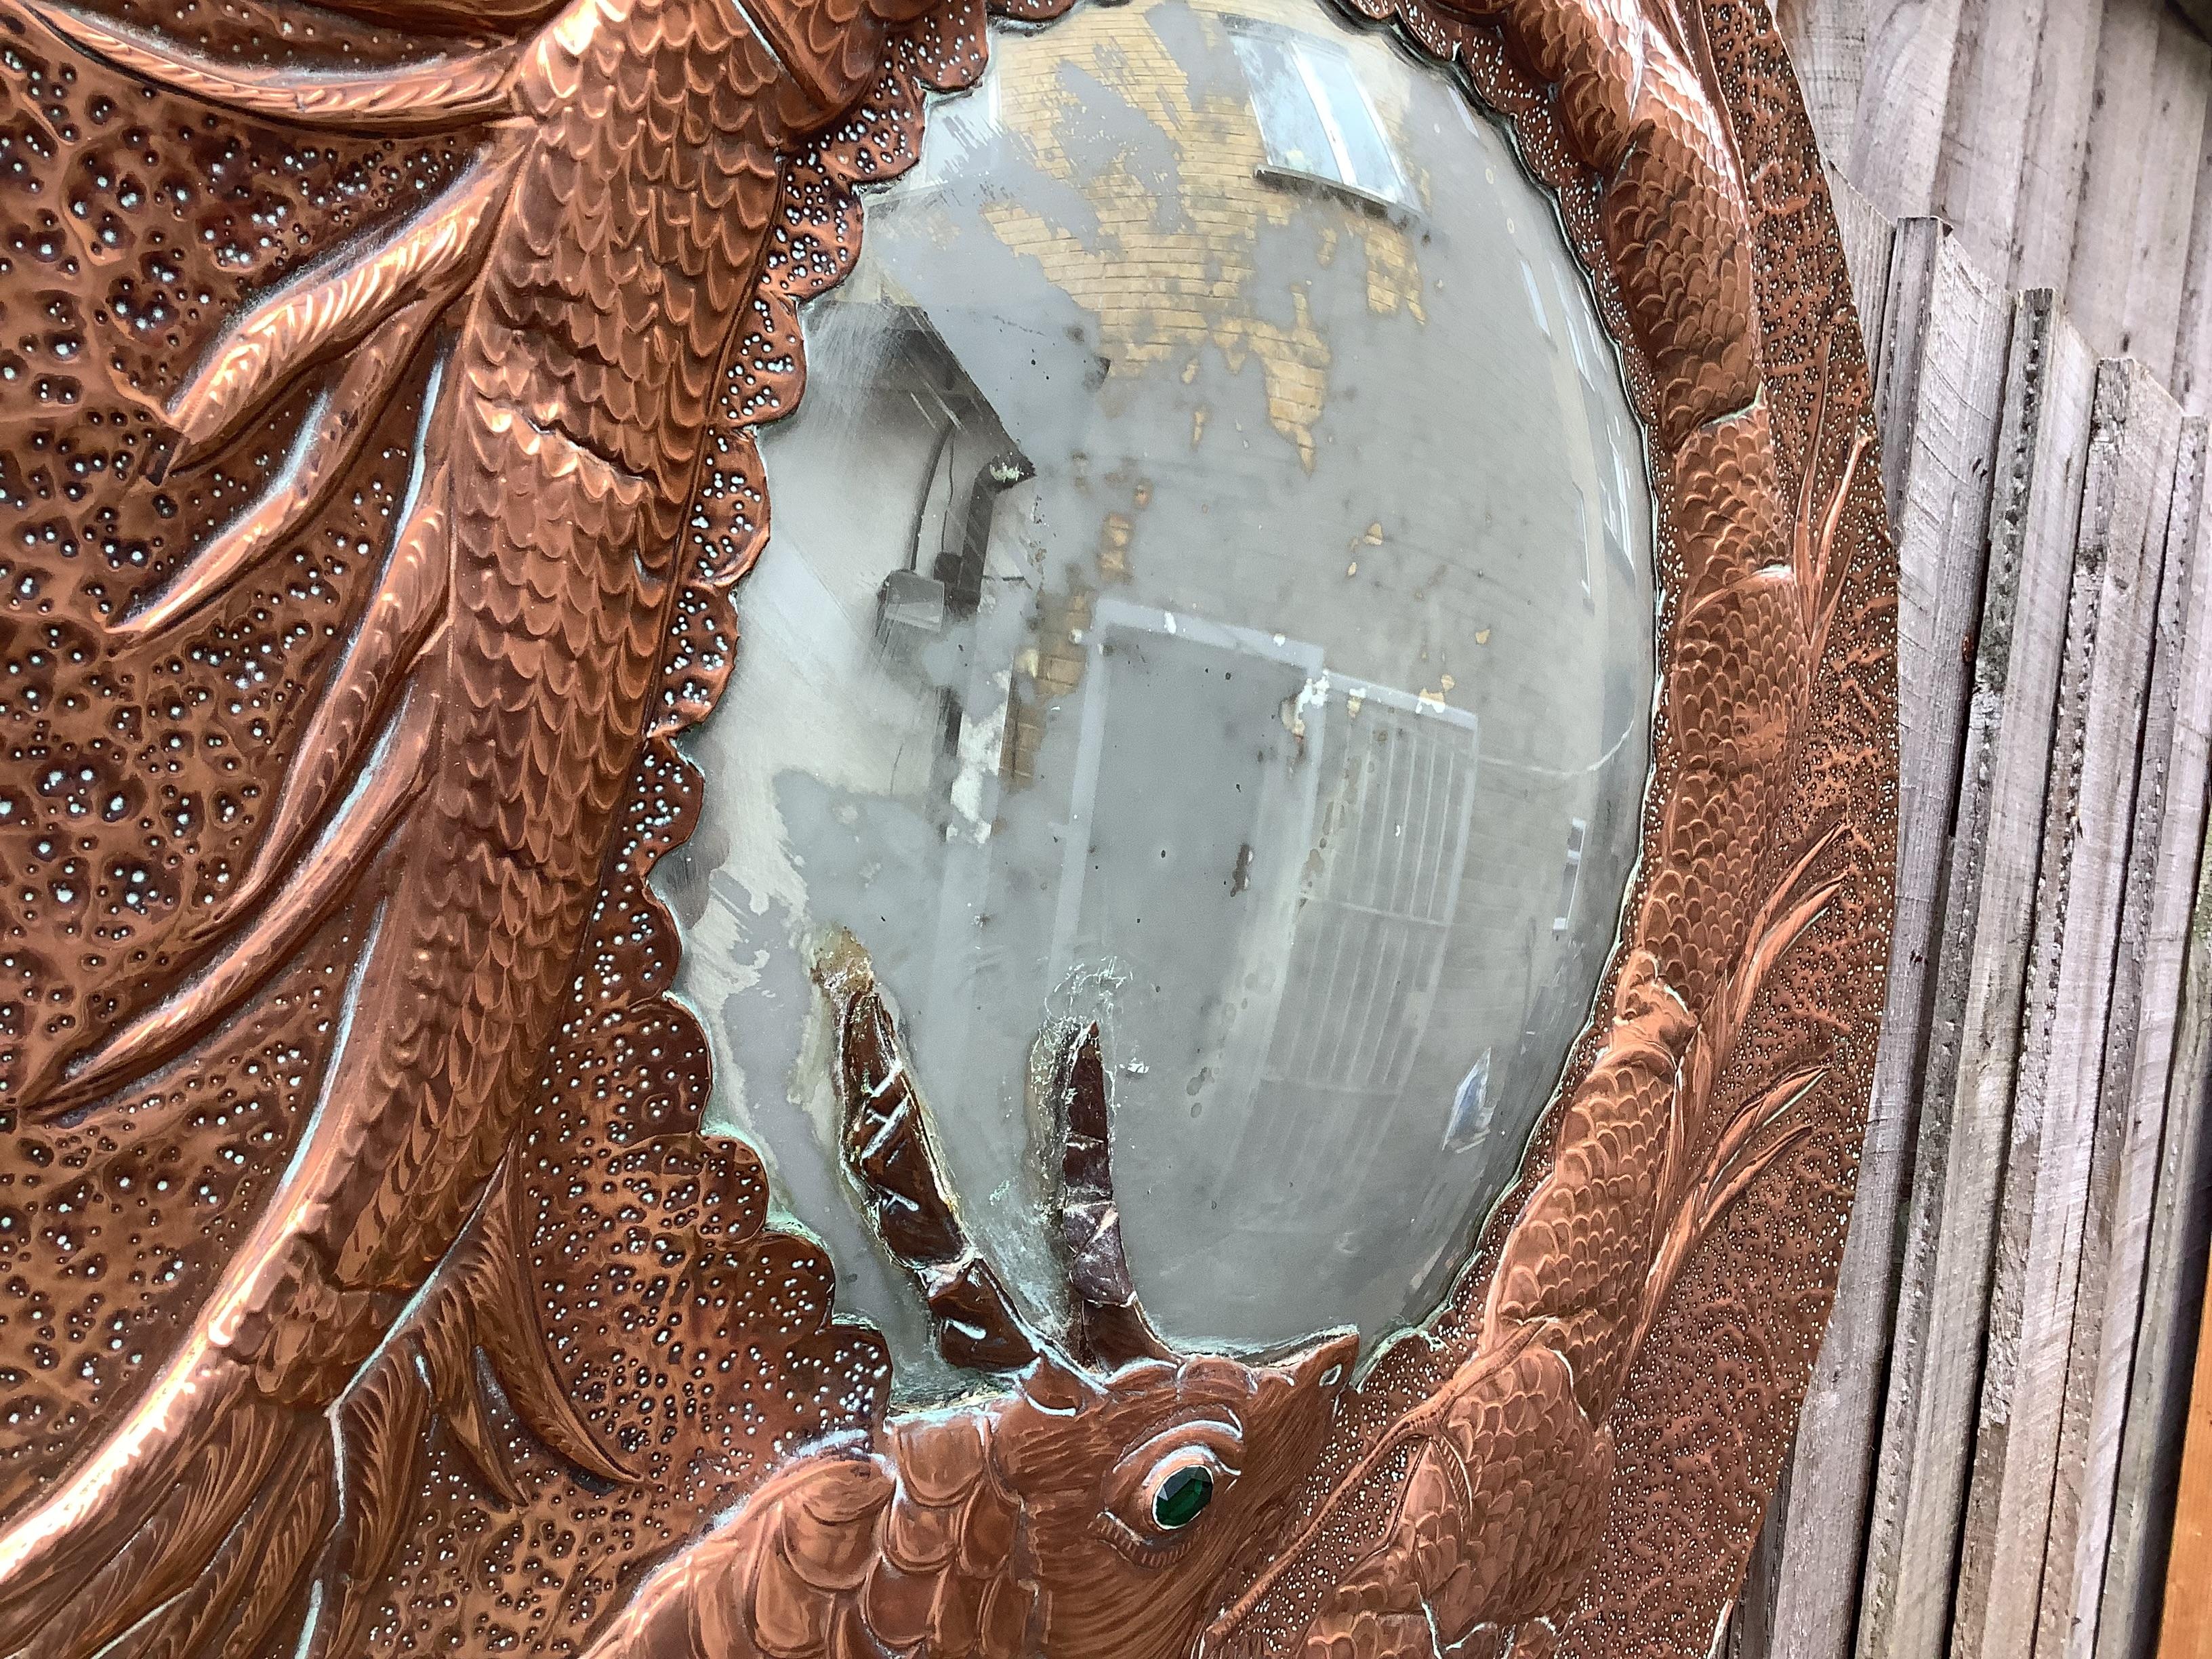 Well crafted copper mirror with a dragon decoration 
acutual mirror is worn makes a superb decorative item
Mirror is signed and dated Cc Anthony de Lucian